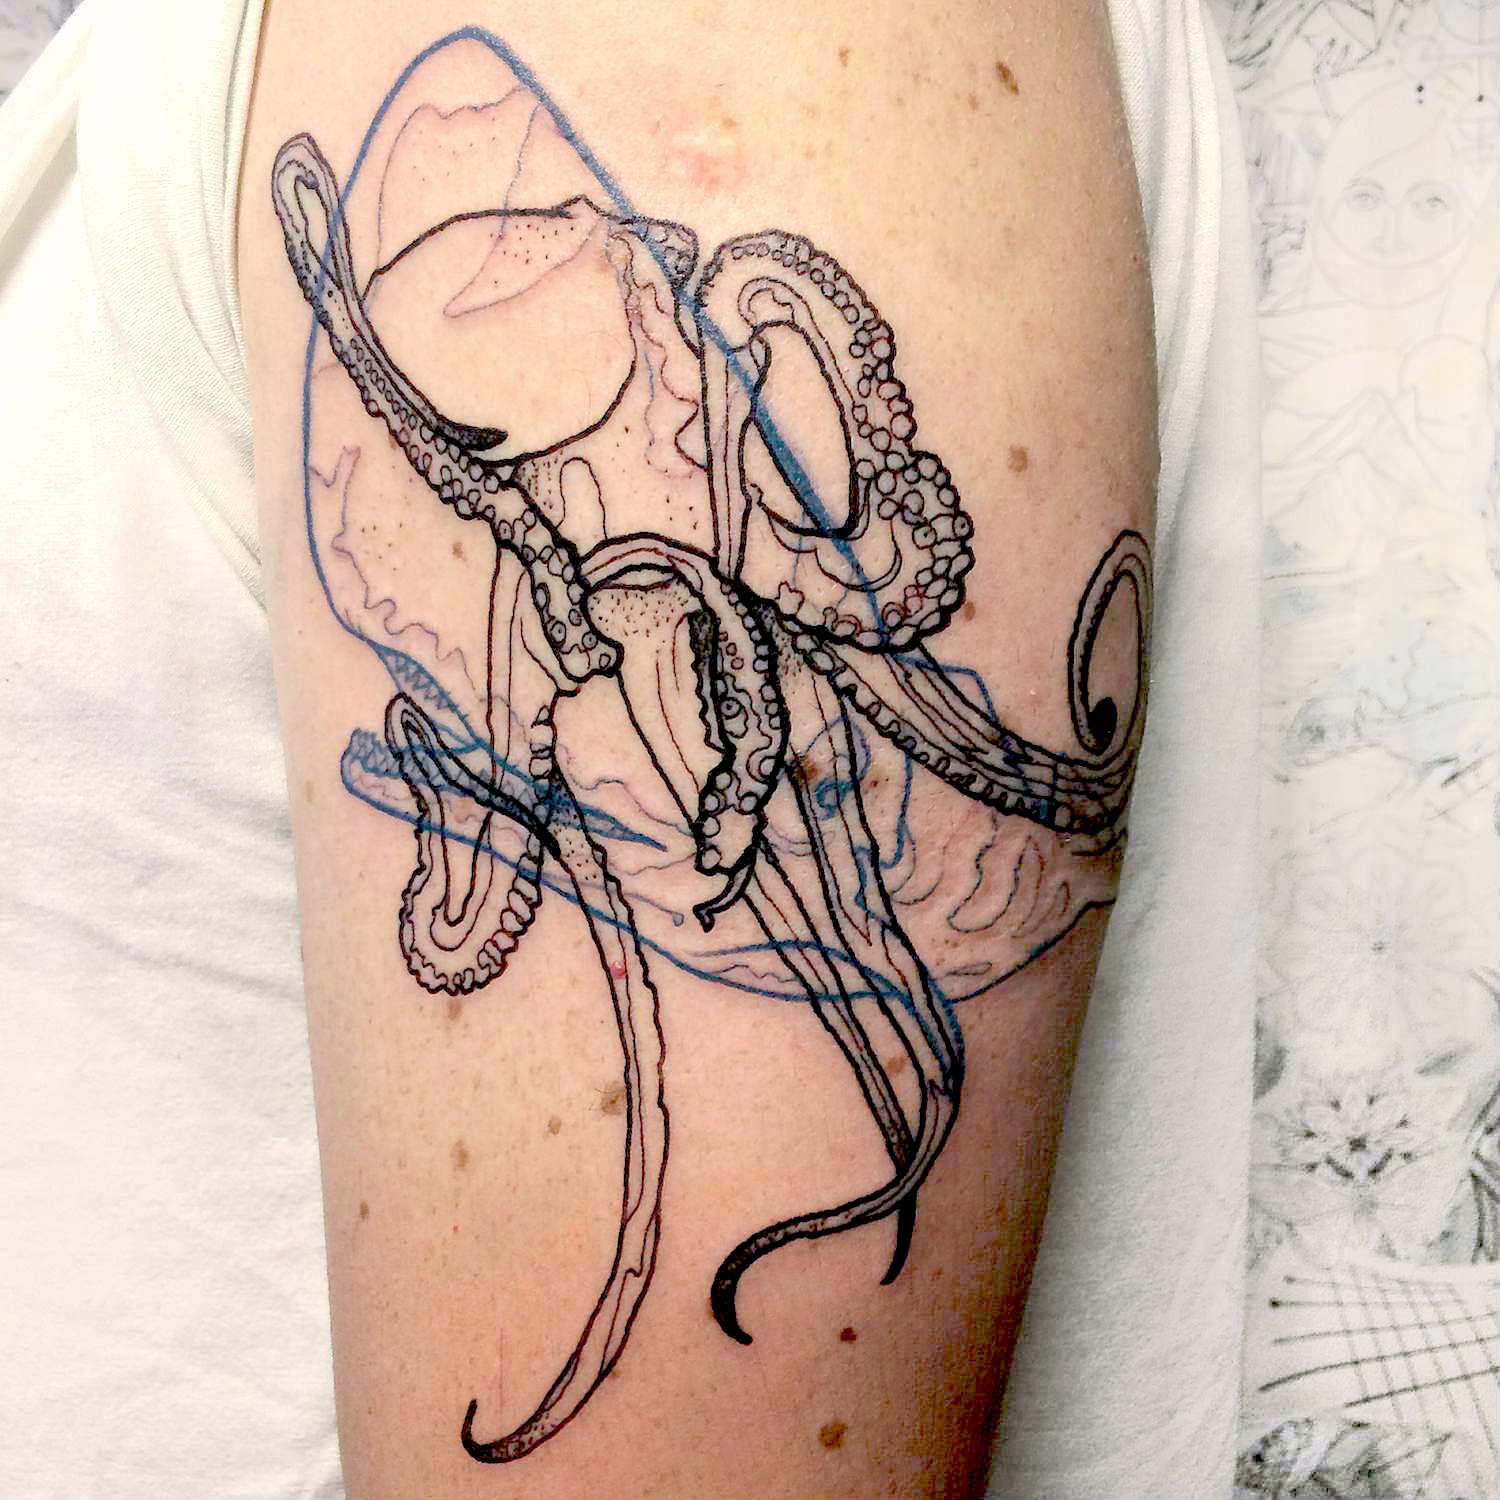 Pablo Puentes puentacles overlay tattoo